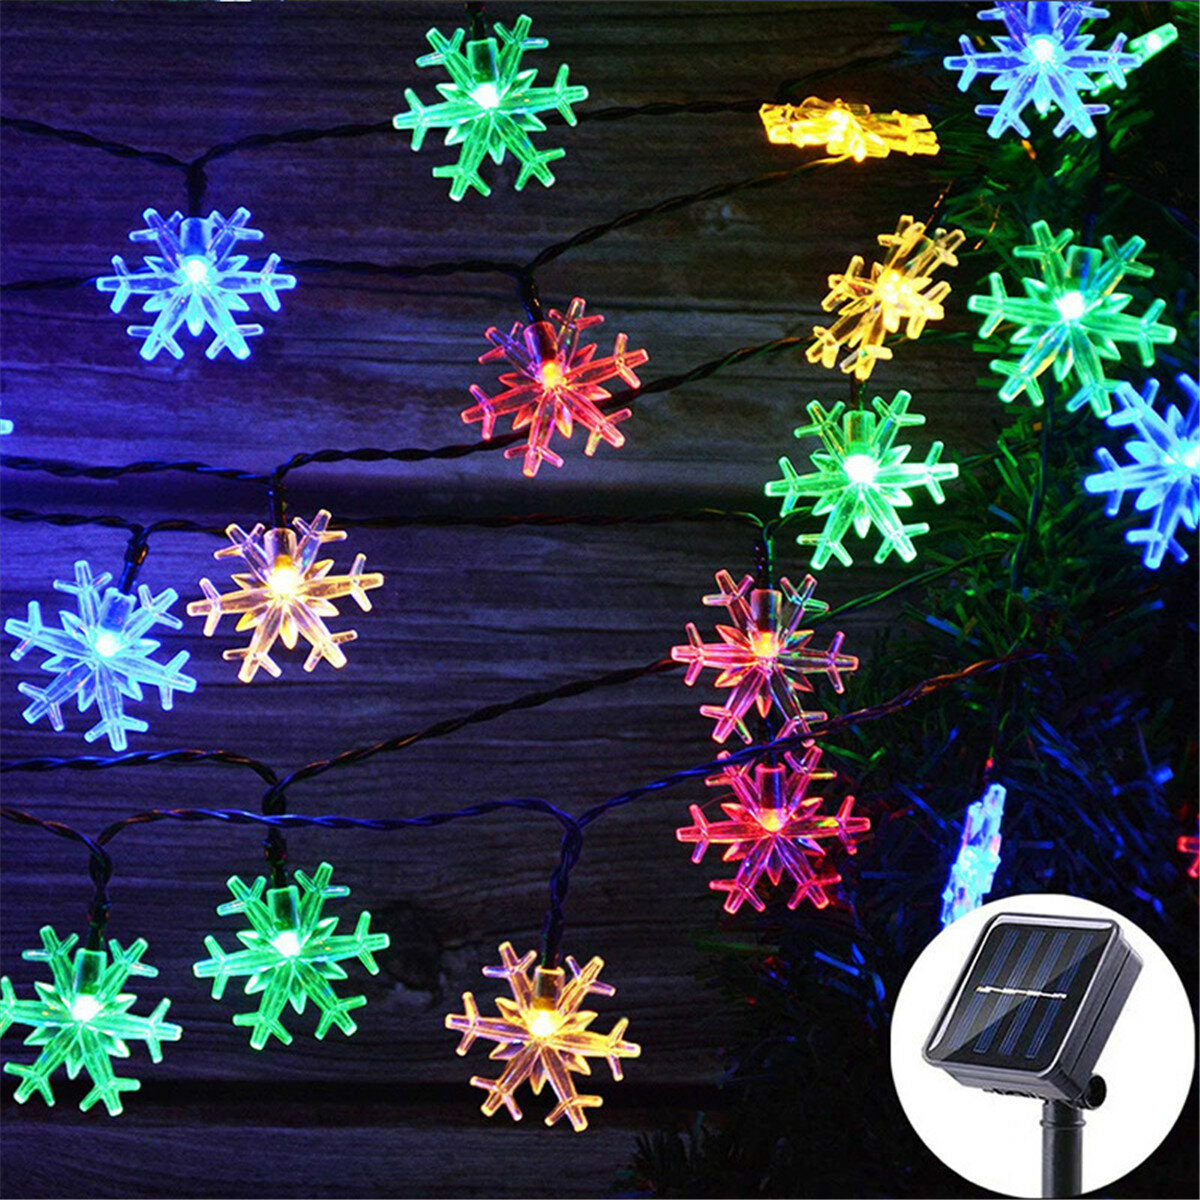 23ft 50 LED Zonne-energie Lichtslingers Sneeuw Lamp Thuis Kerst Decor Xmas Party